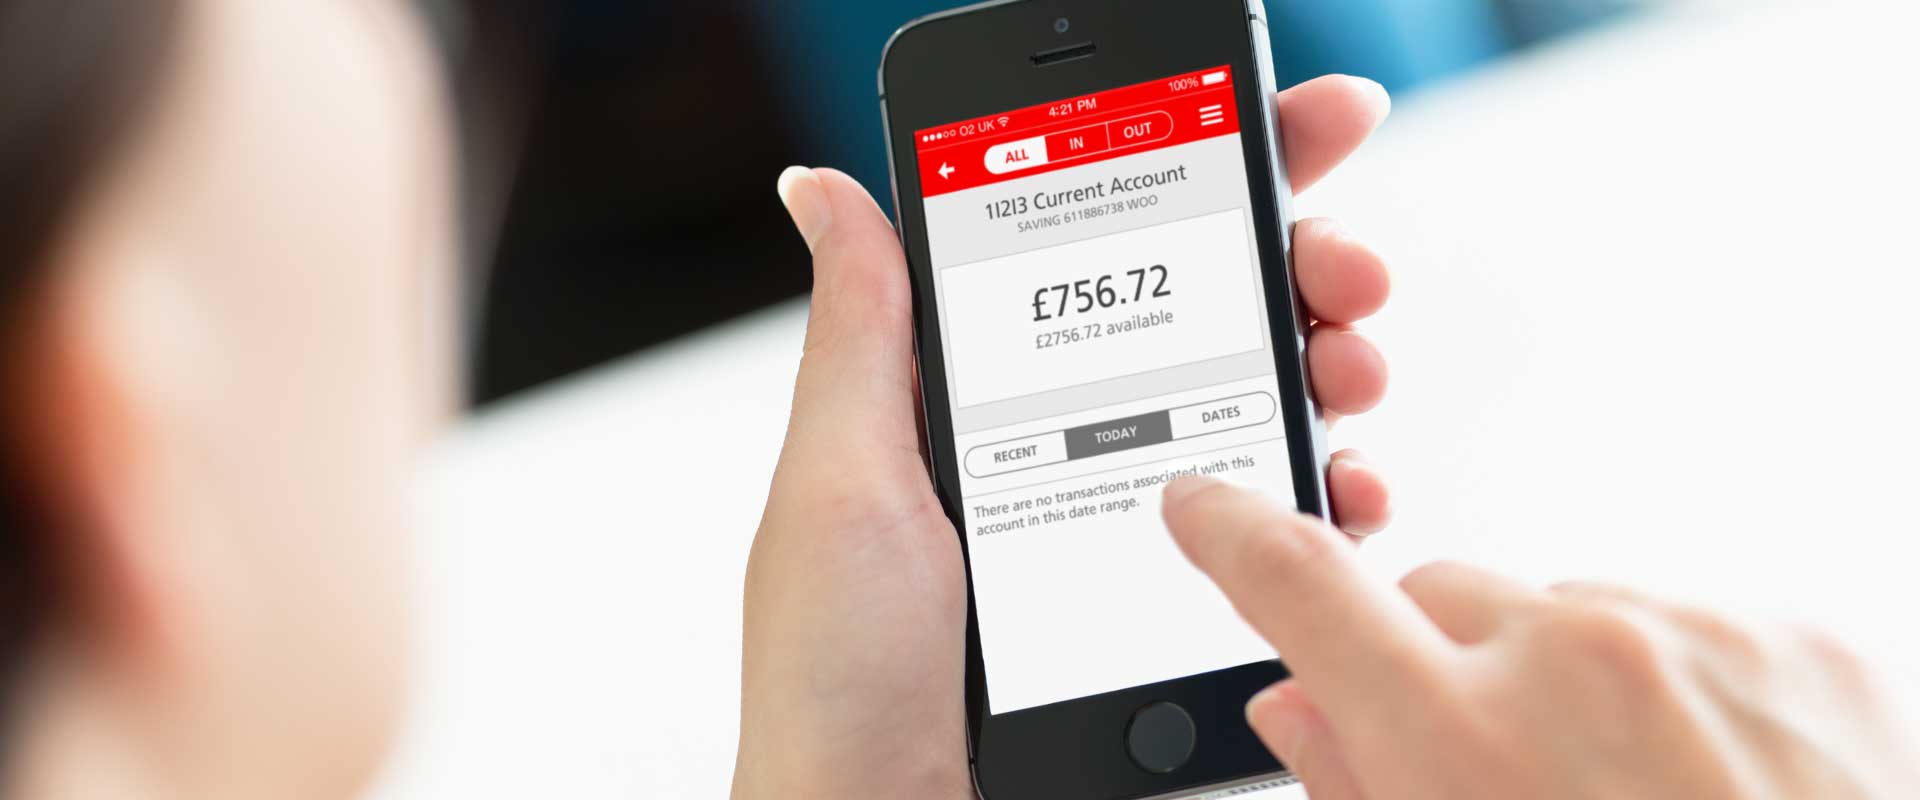 picture of a woman holding an iphone with the santander mobile banking app on the screen